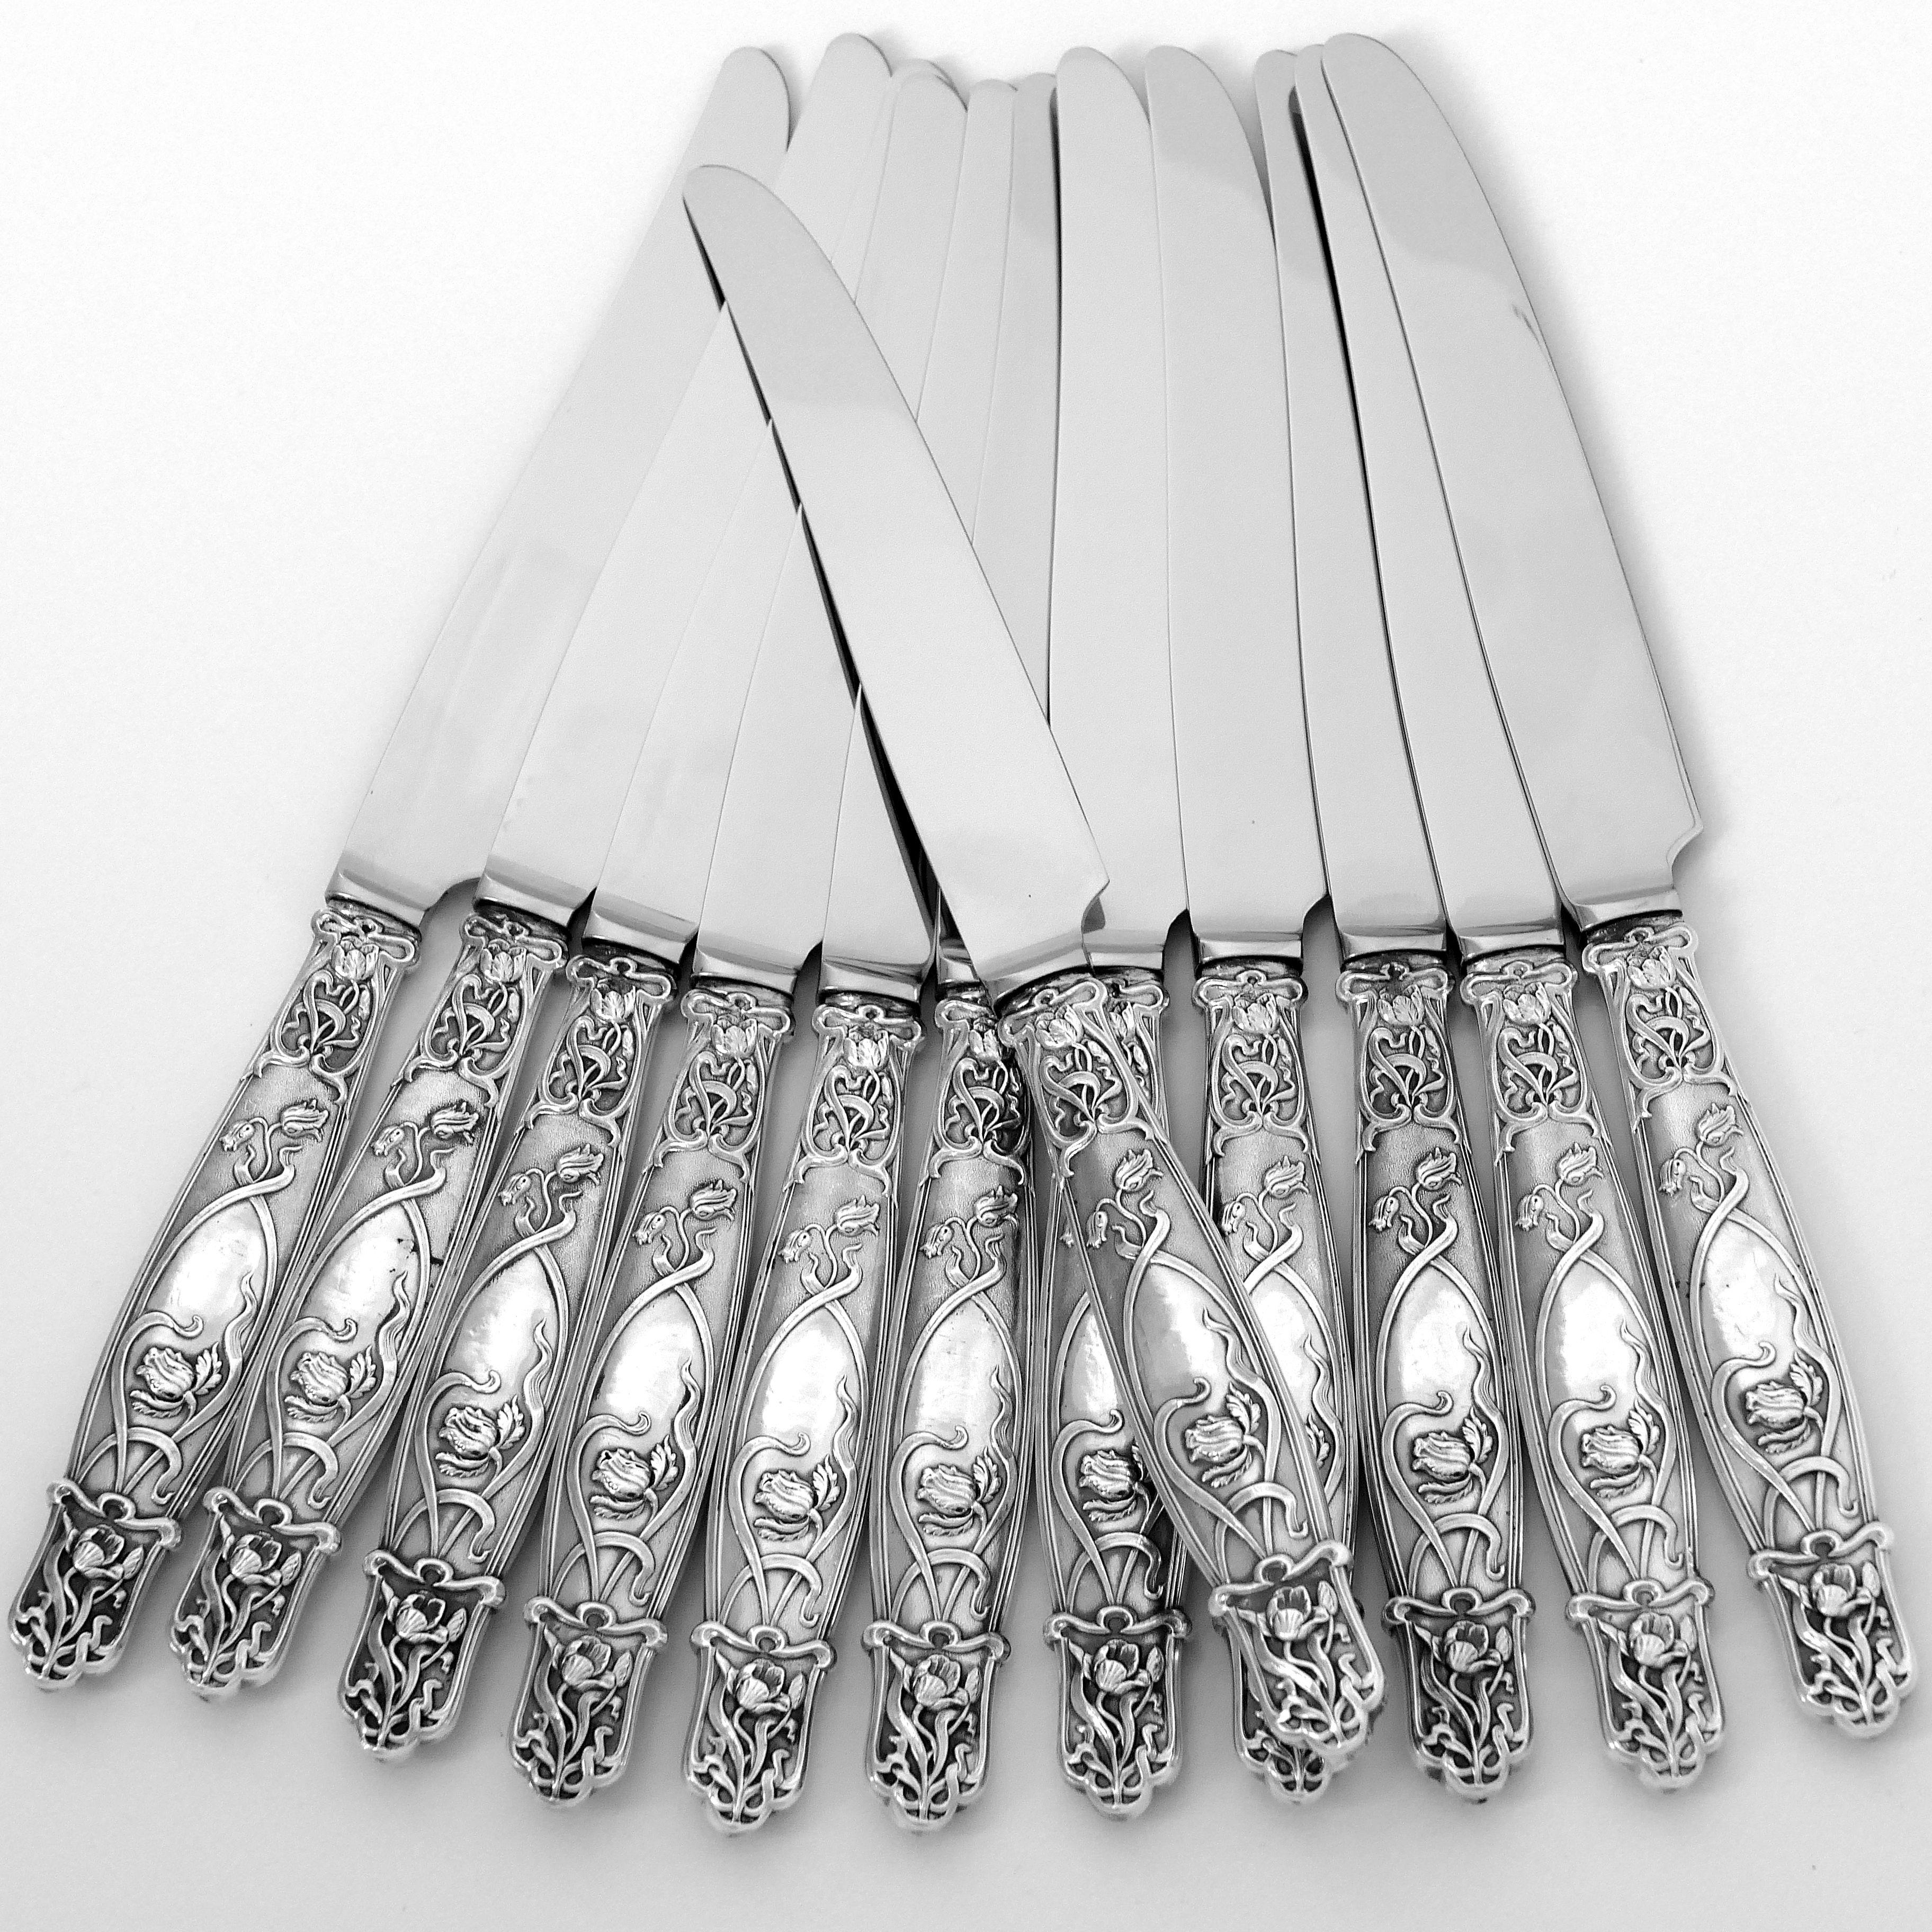 Rare French Sterling Silver Dinner Knife Set 12 Pc, Poppie, New Stainless Blades 6